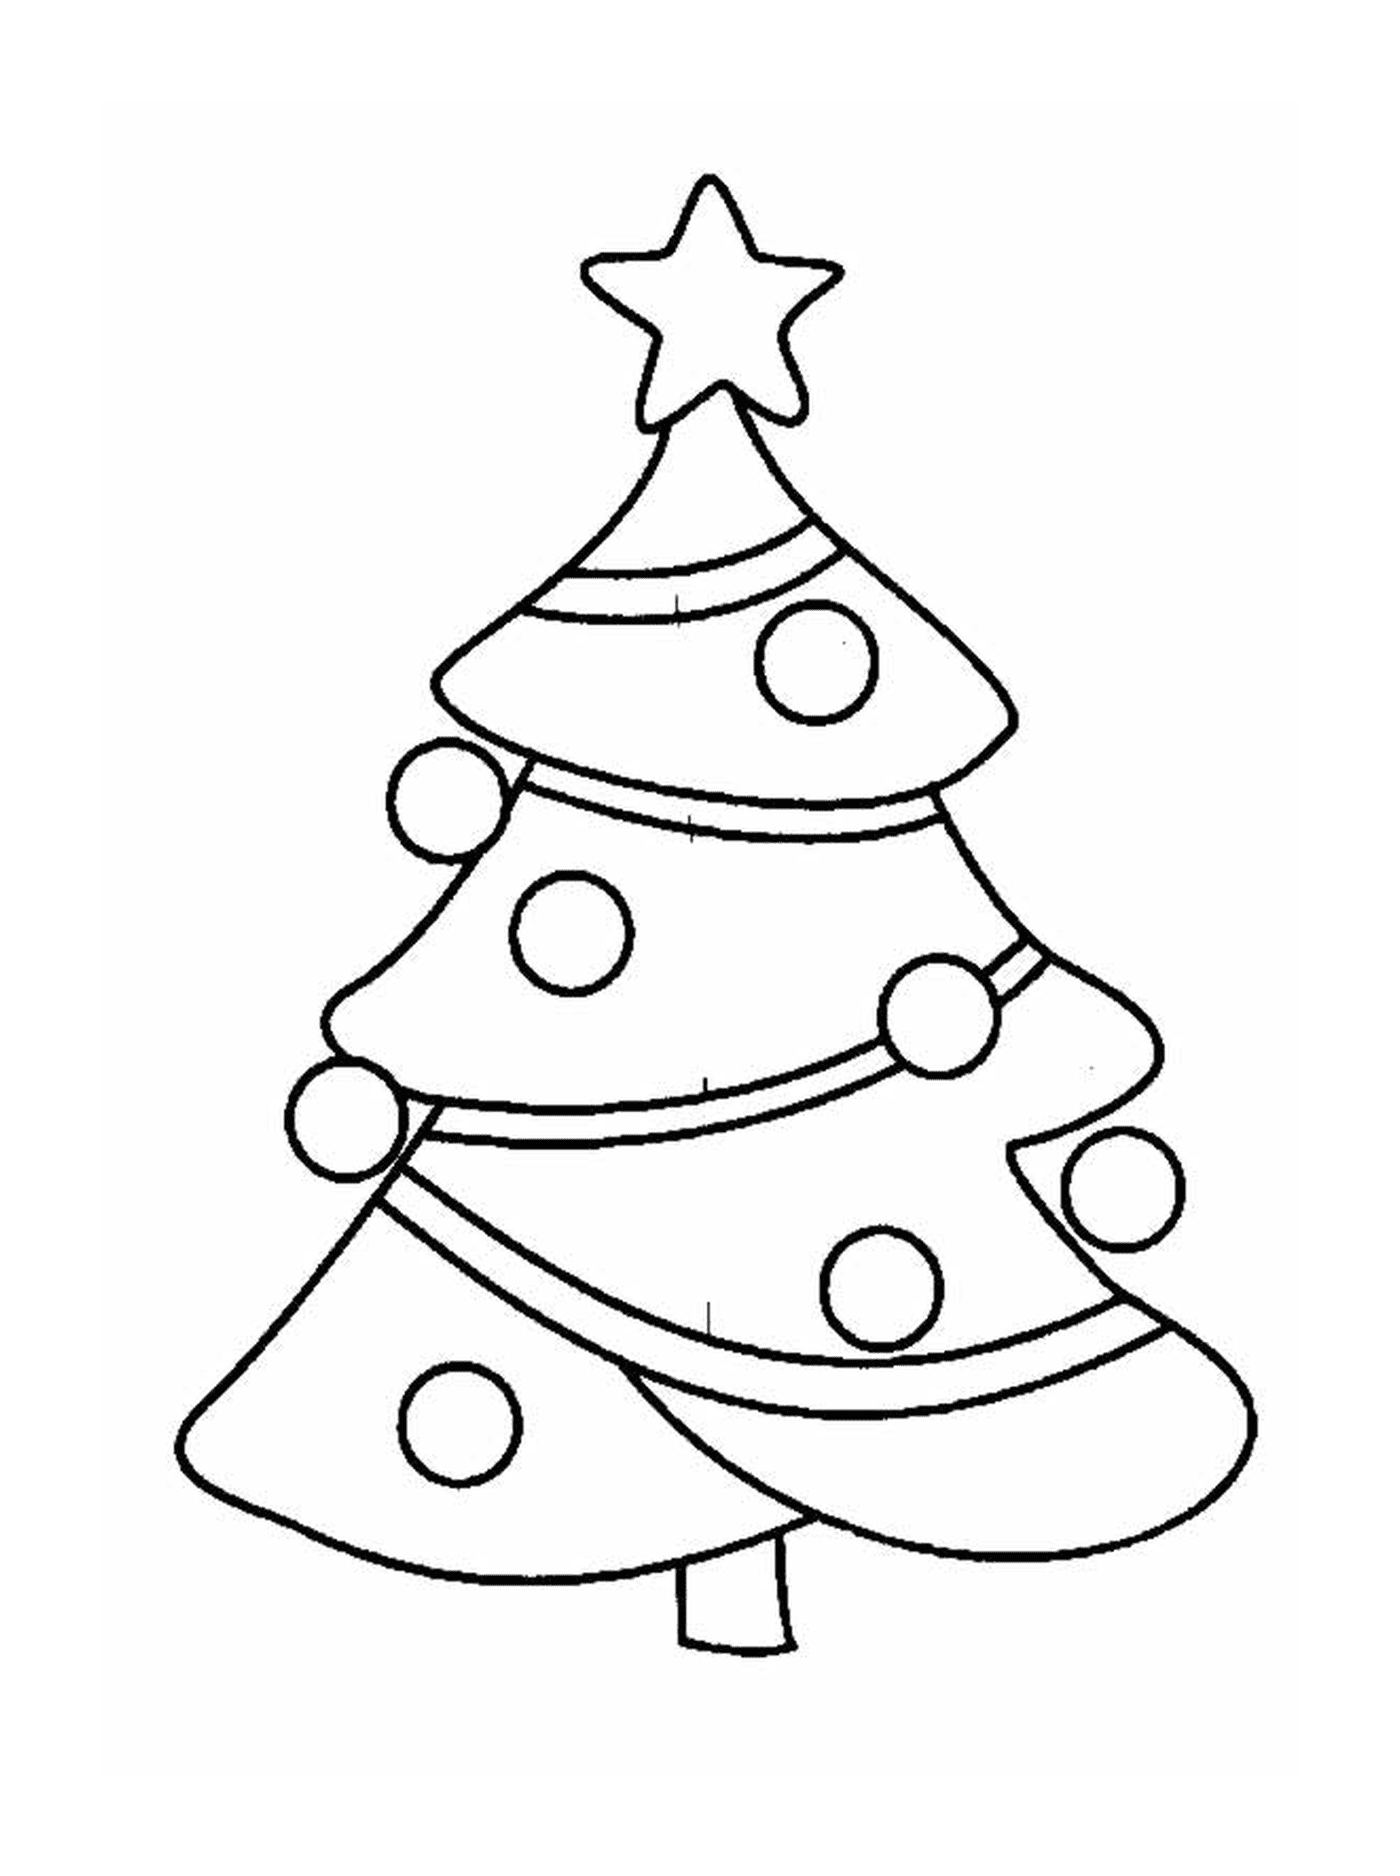  A Christmas tree with ornaments at the top 